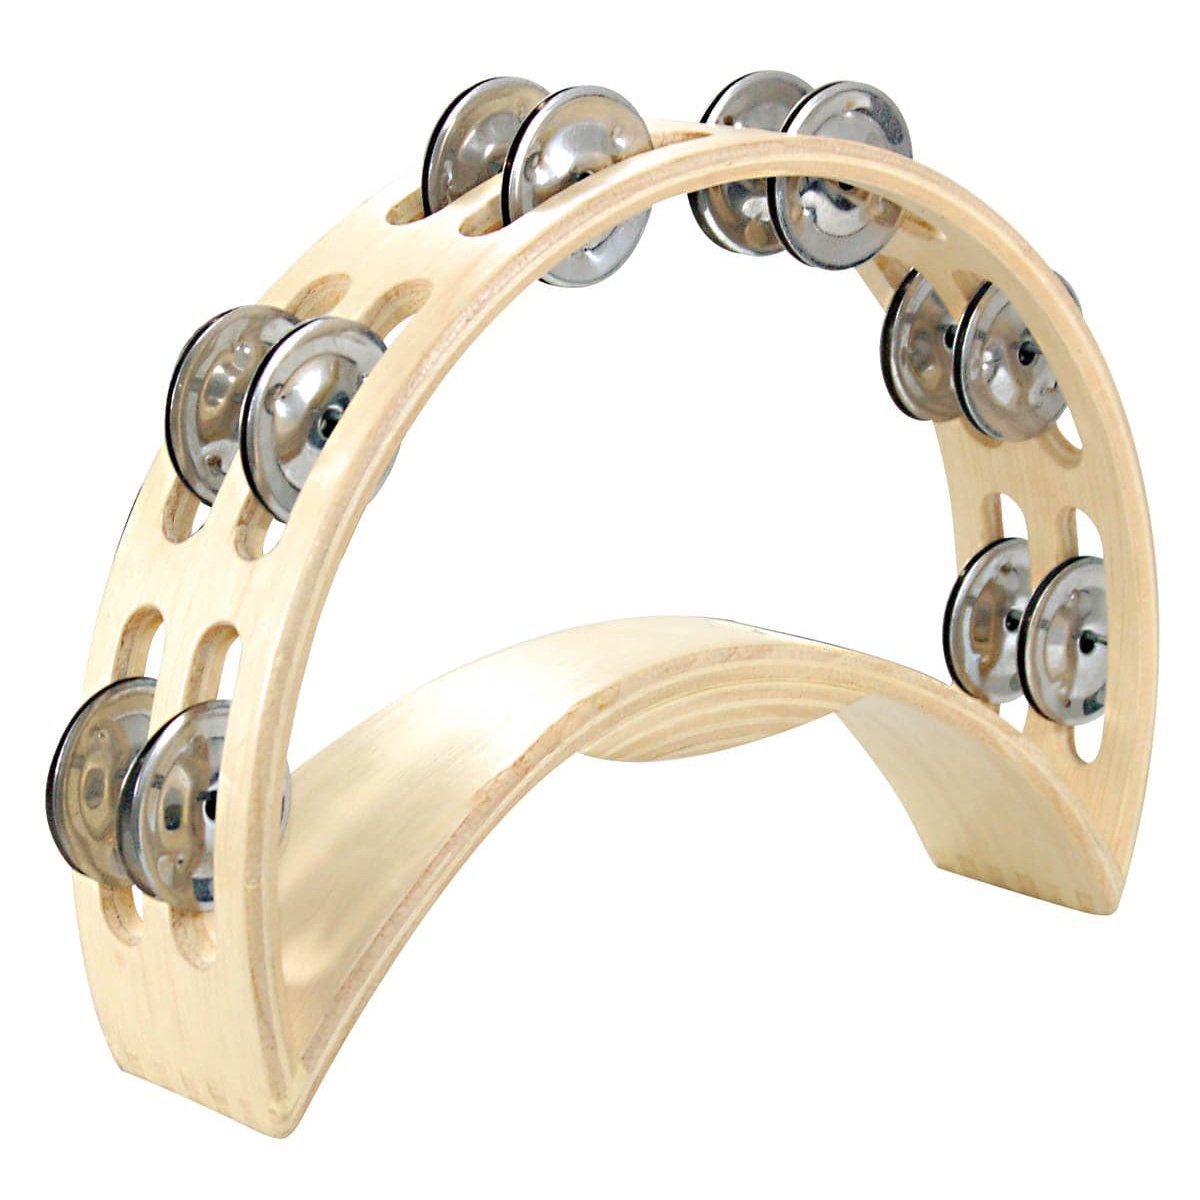 Tycoon Percussion Deluxe Wooden Moon Tambourine